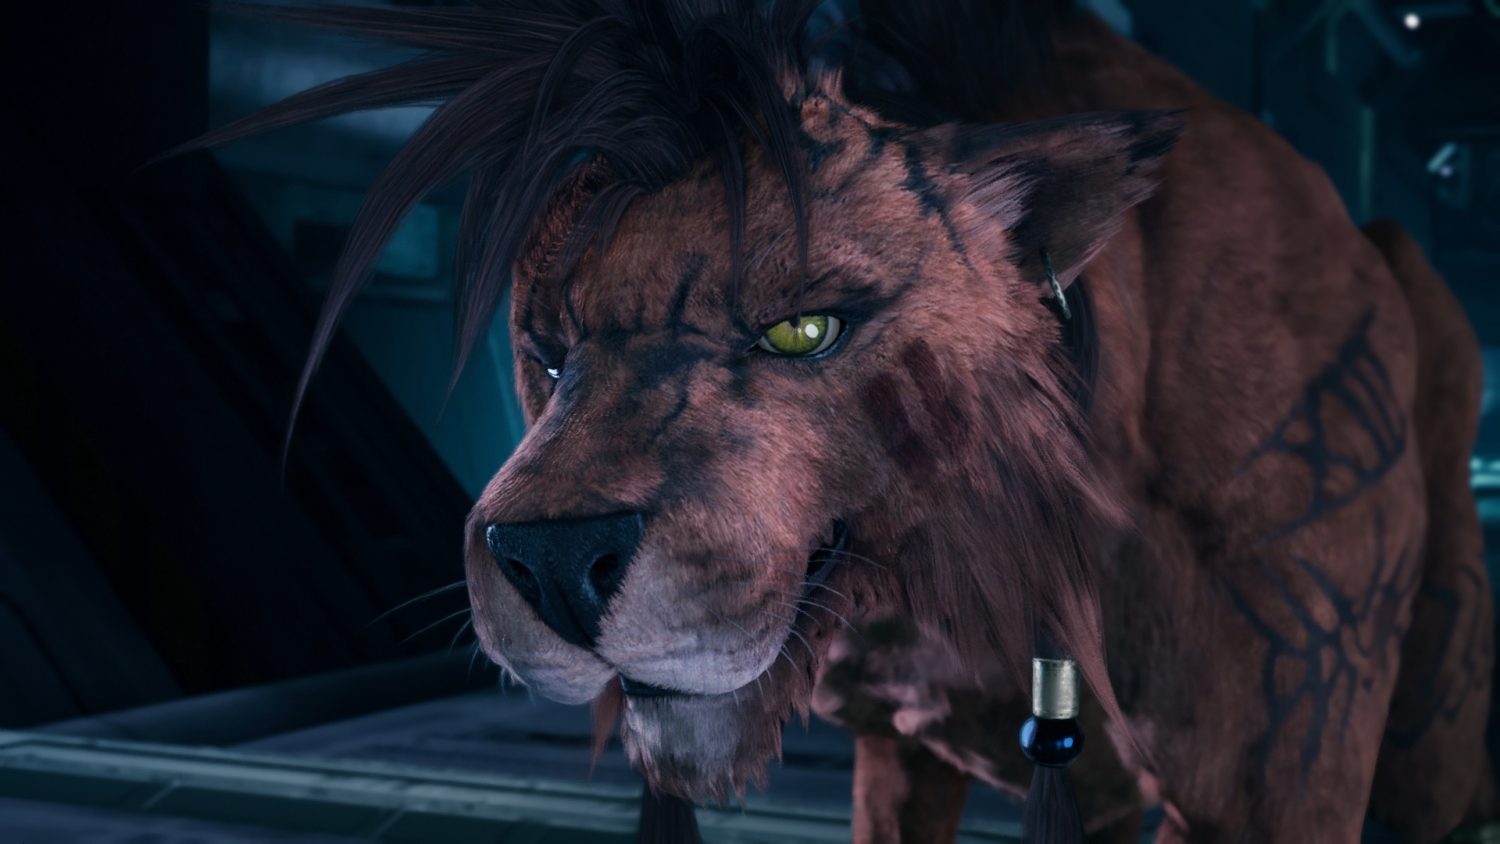 Final Fantasy 7 Remake Red XIII